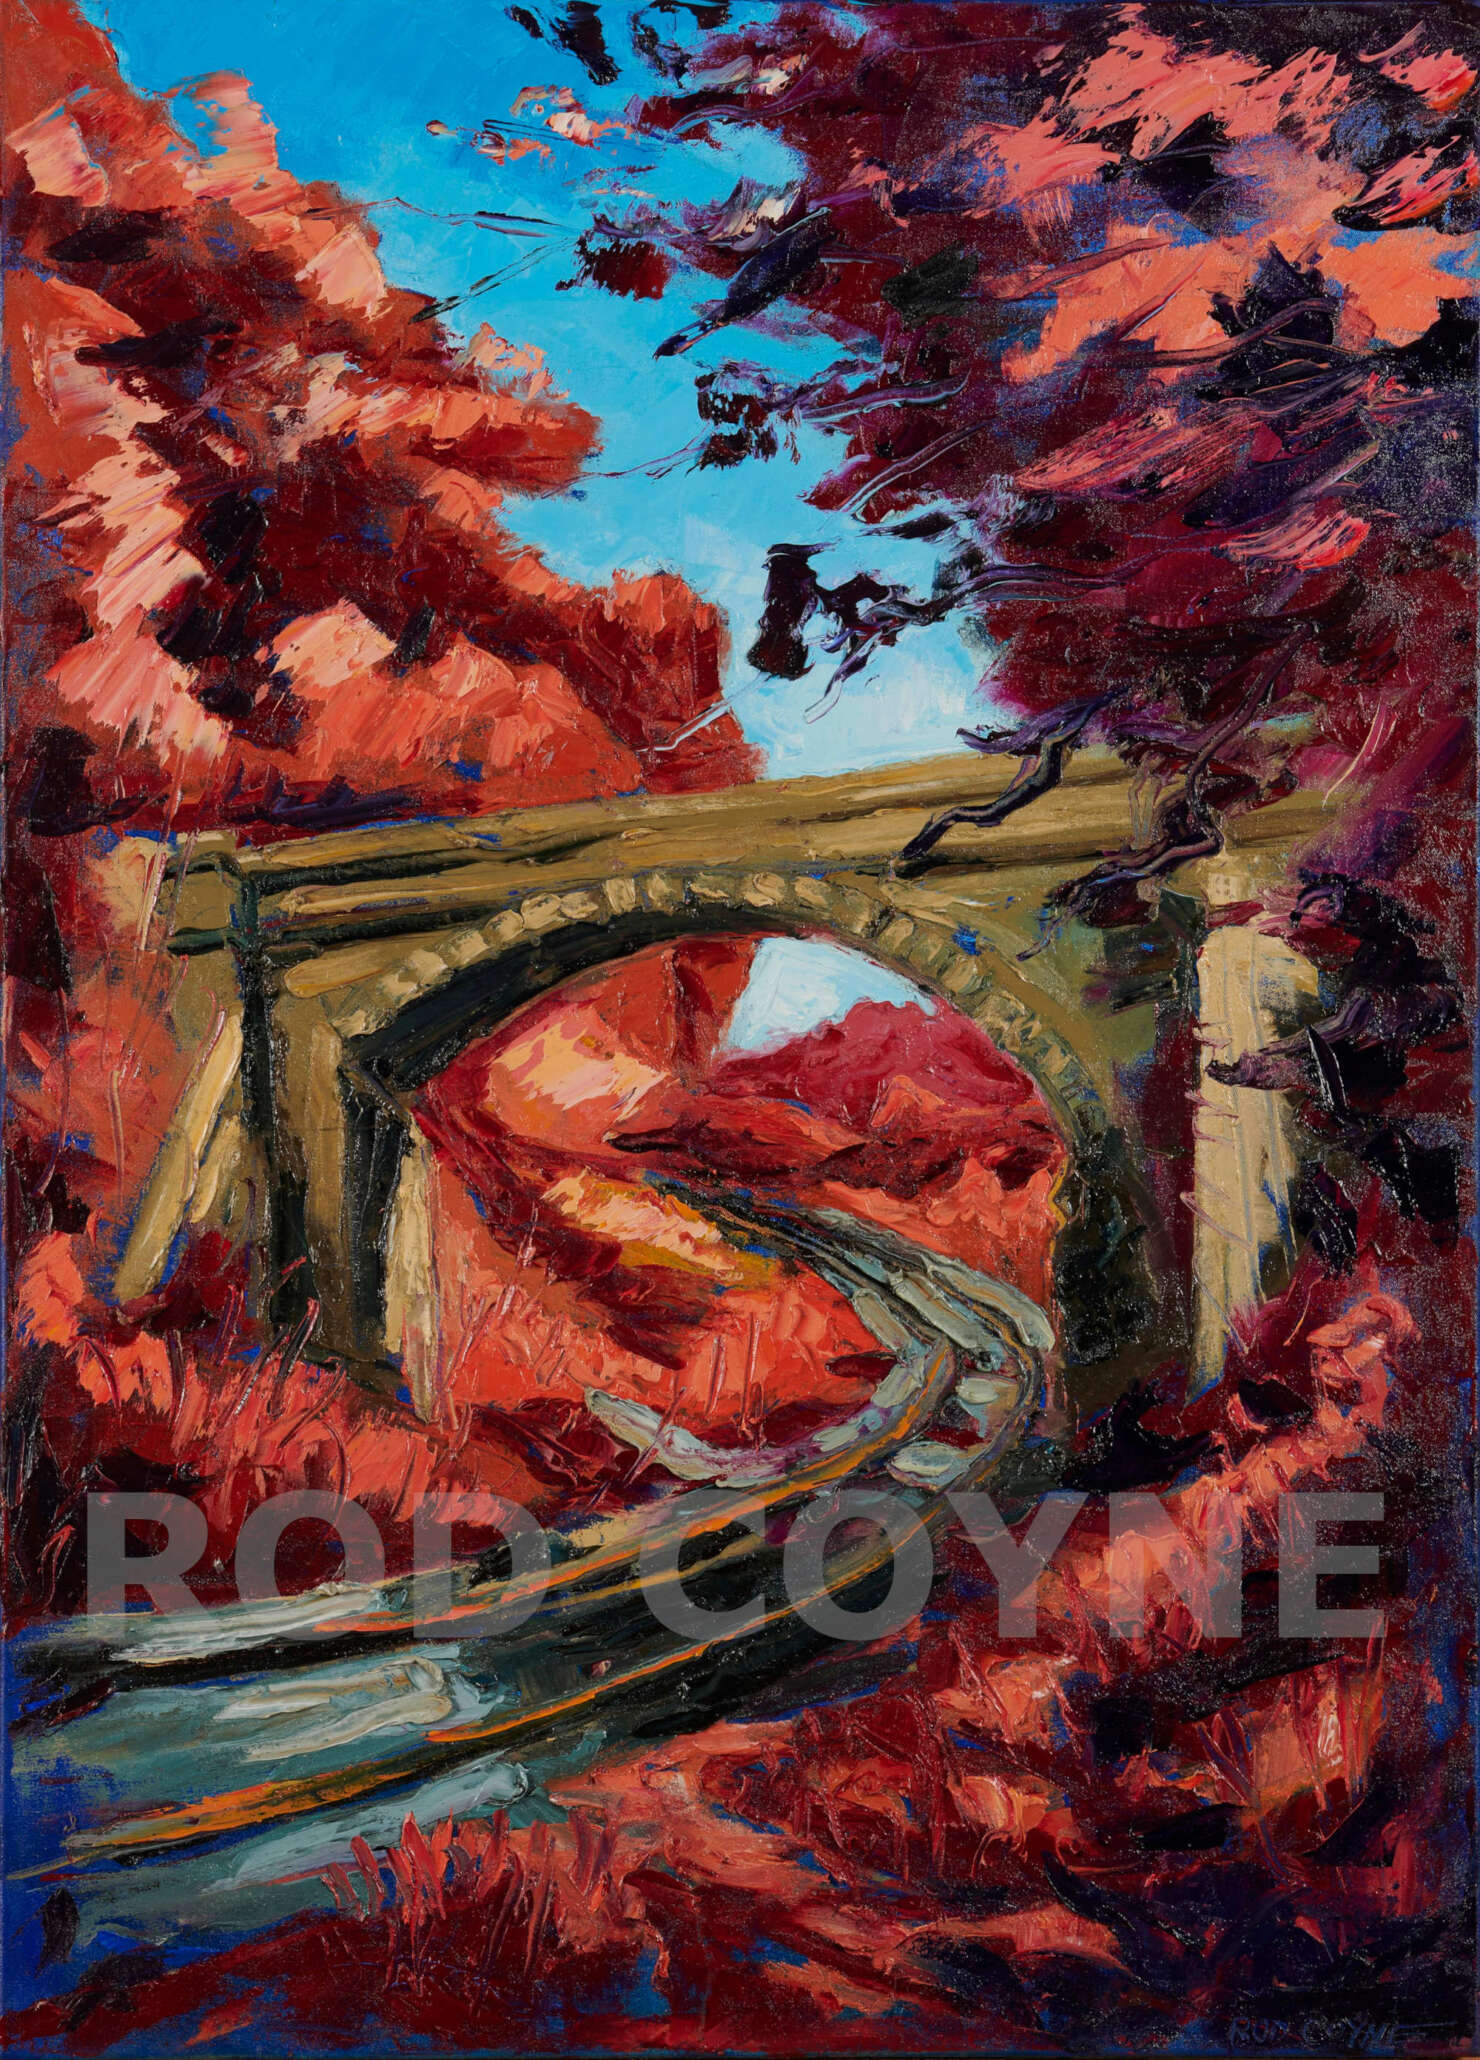 artist rod coyne's landscape "Lion's Arch" is shown here, watermarked.